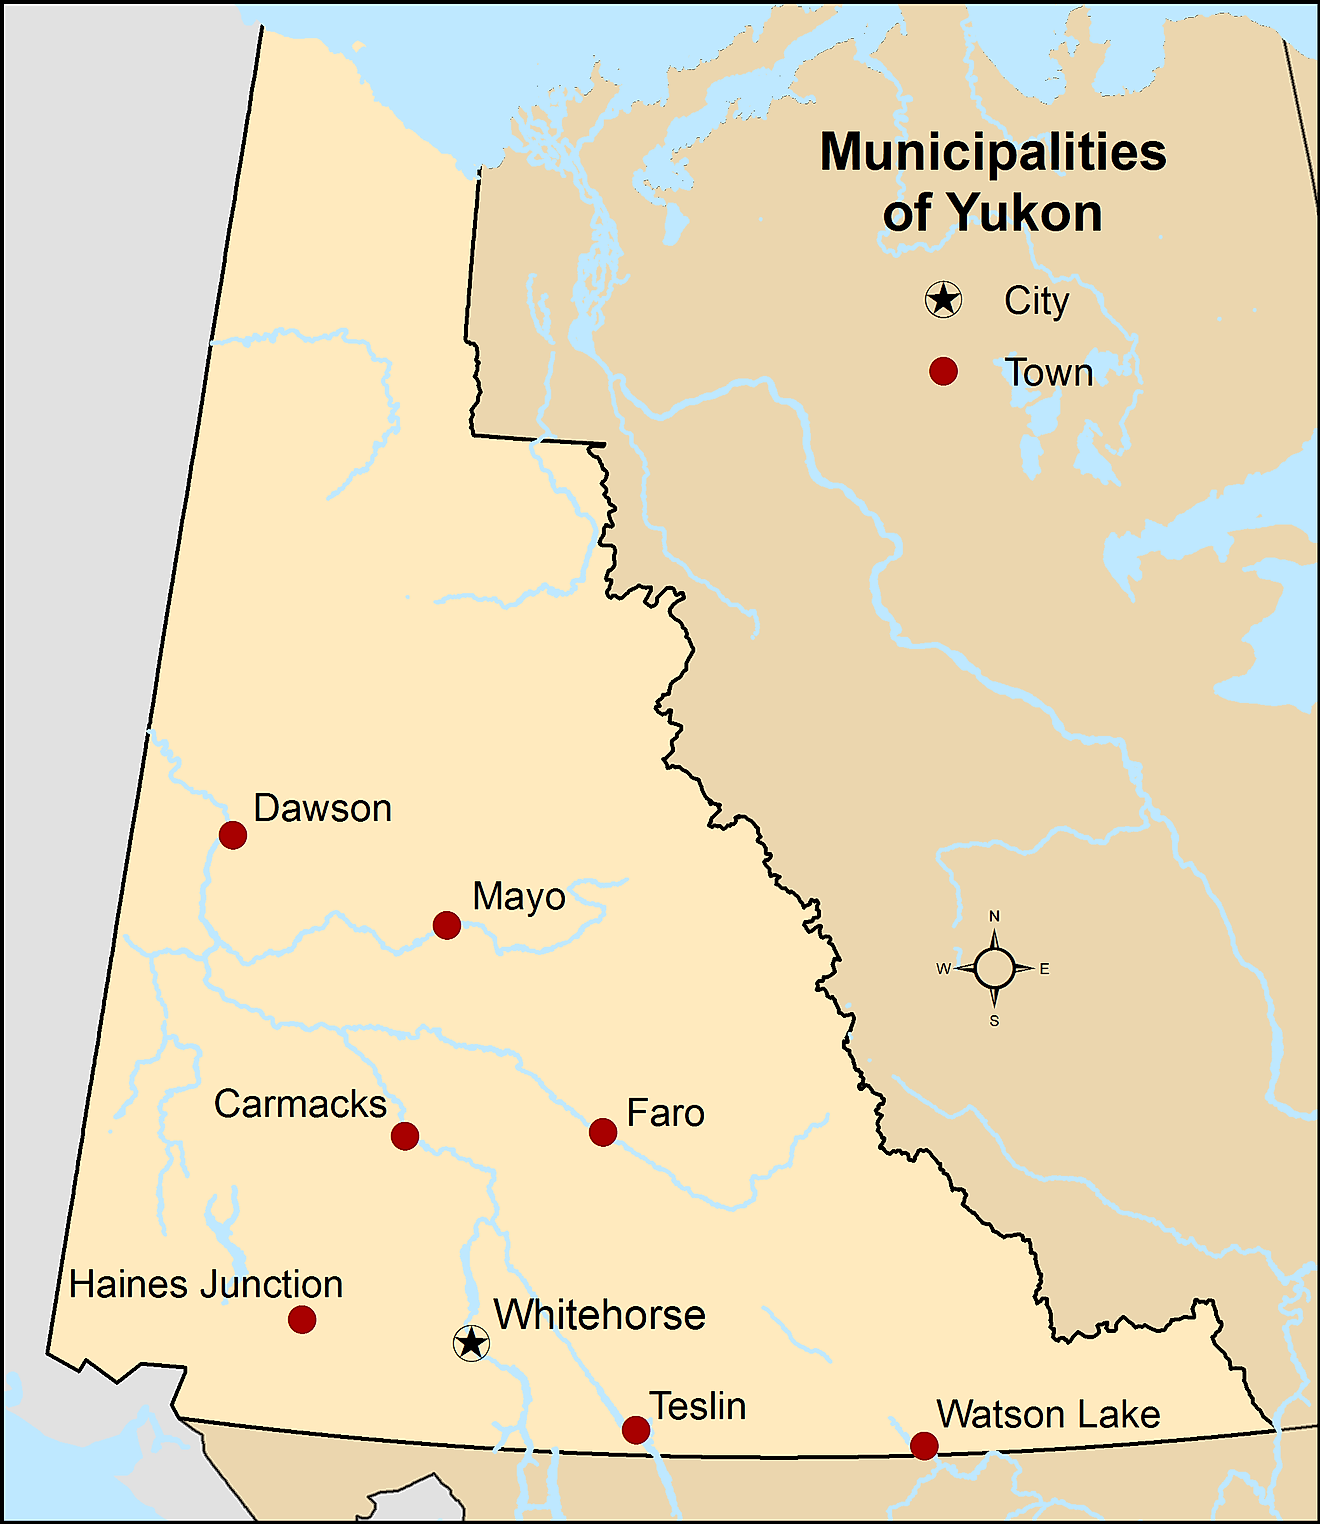 Administrative Map of Yukon showing its municipalities and its capital city - Whitehorse. Image credit: Hwy43/Wikimedia.com